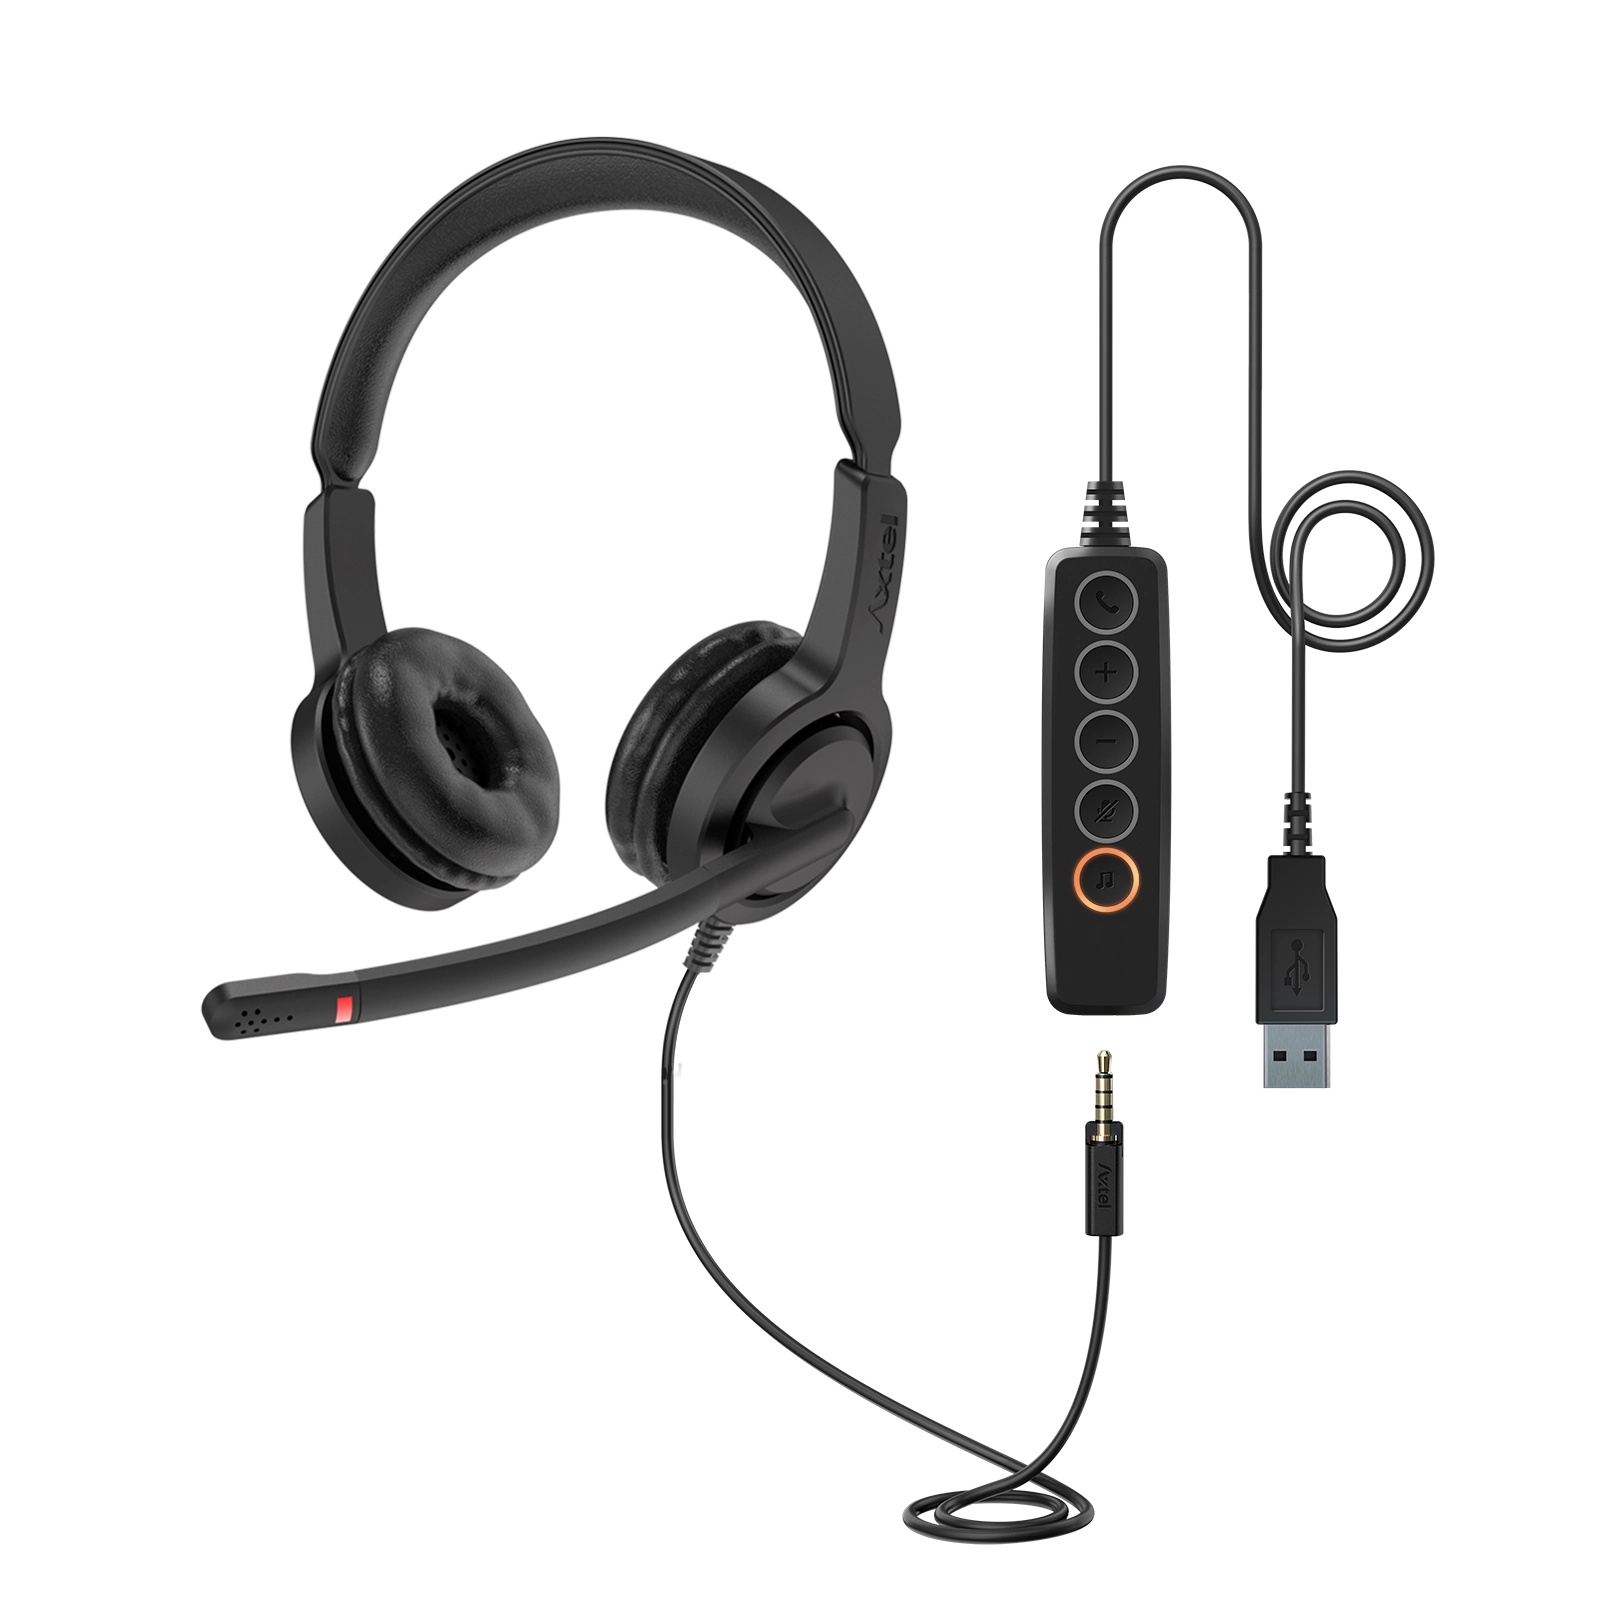 Headsets - Voice UC28-35 duo NC USB